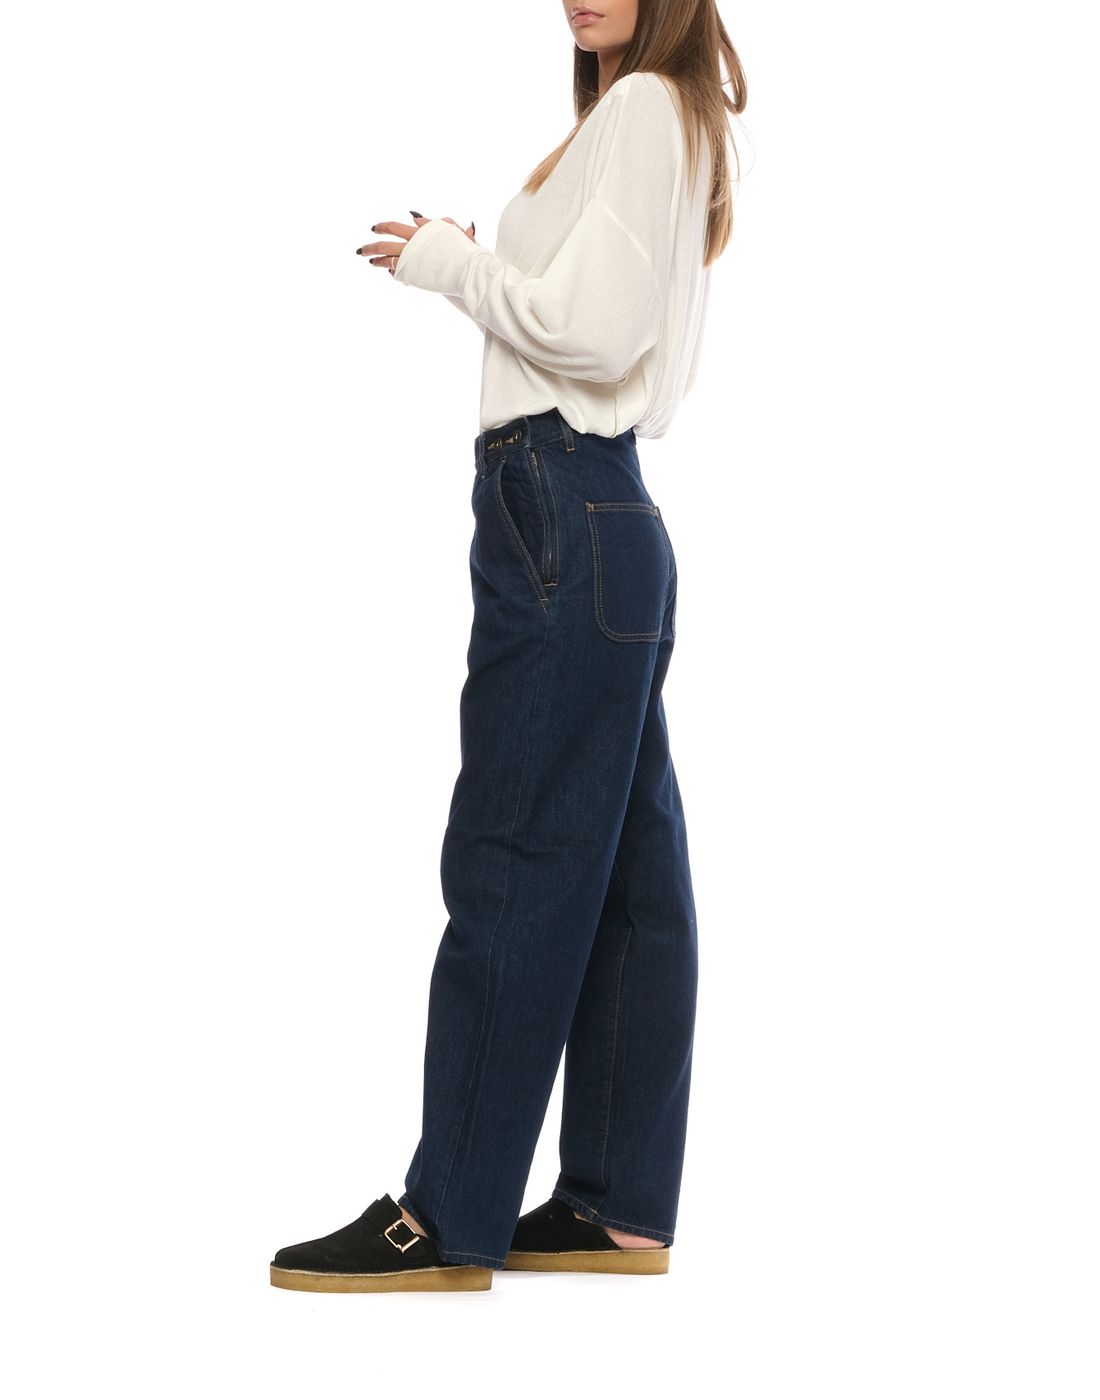 Jeans for woman TYPE 1 DENIM PeppinoPeppino